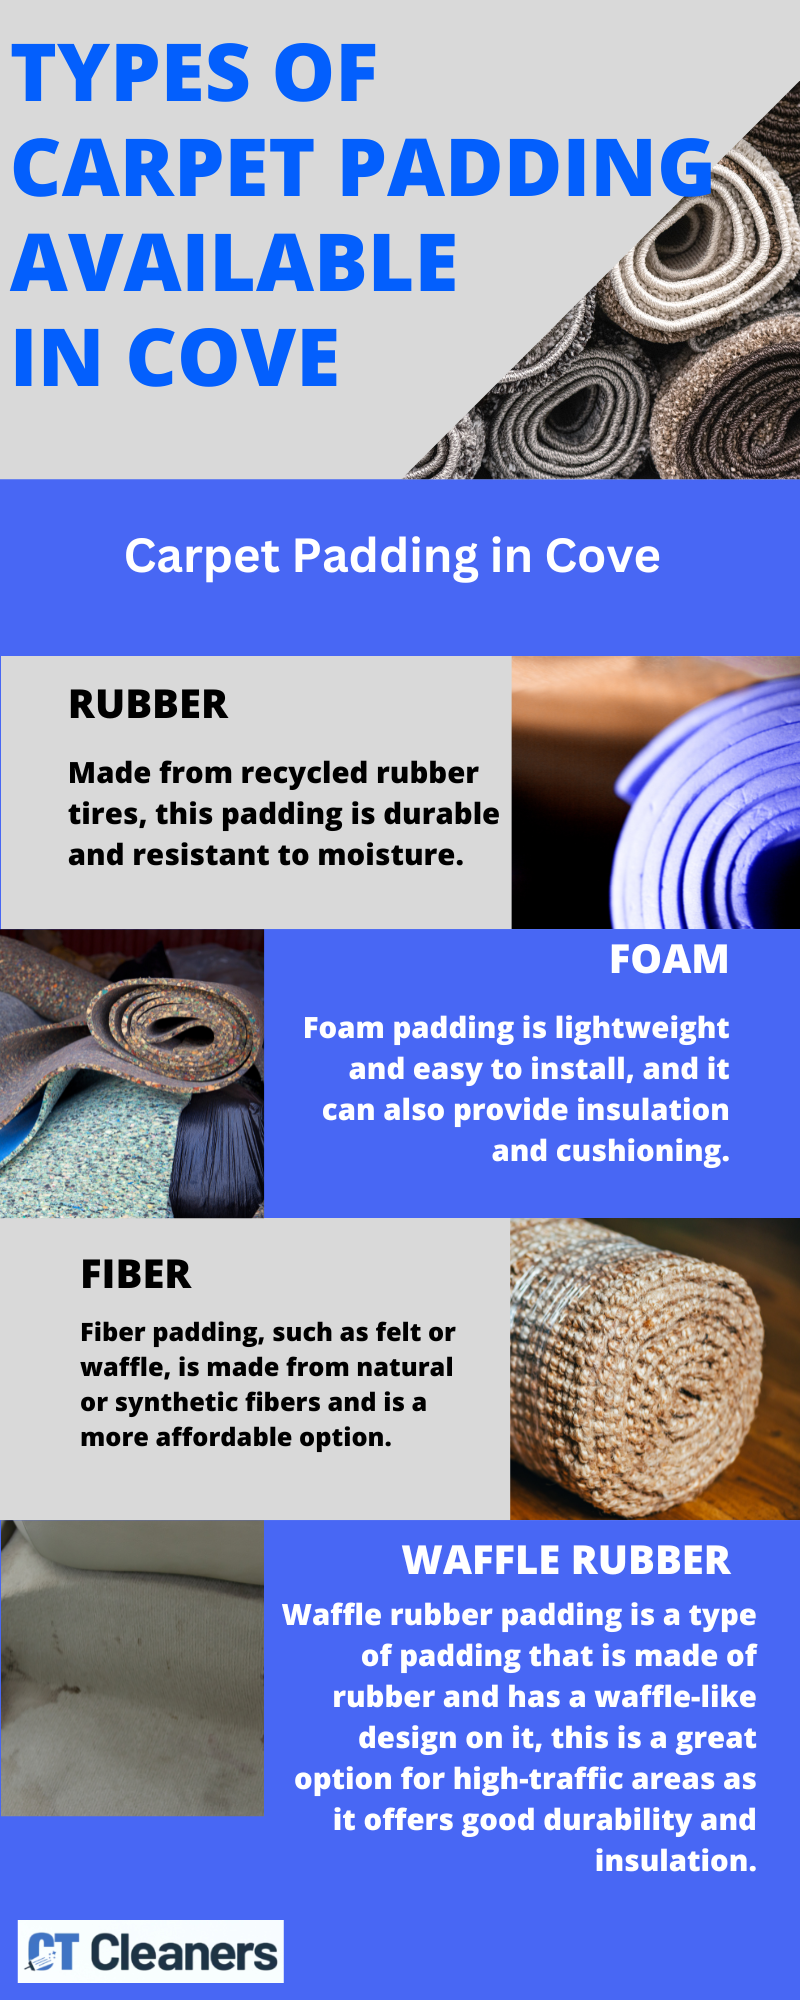 Types of Carpet Padding Available in Cove